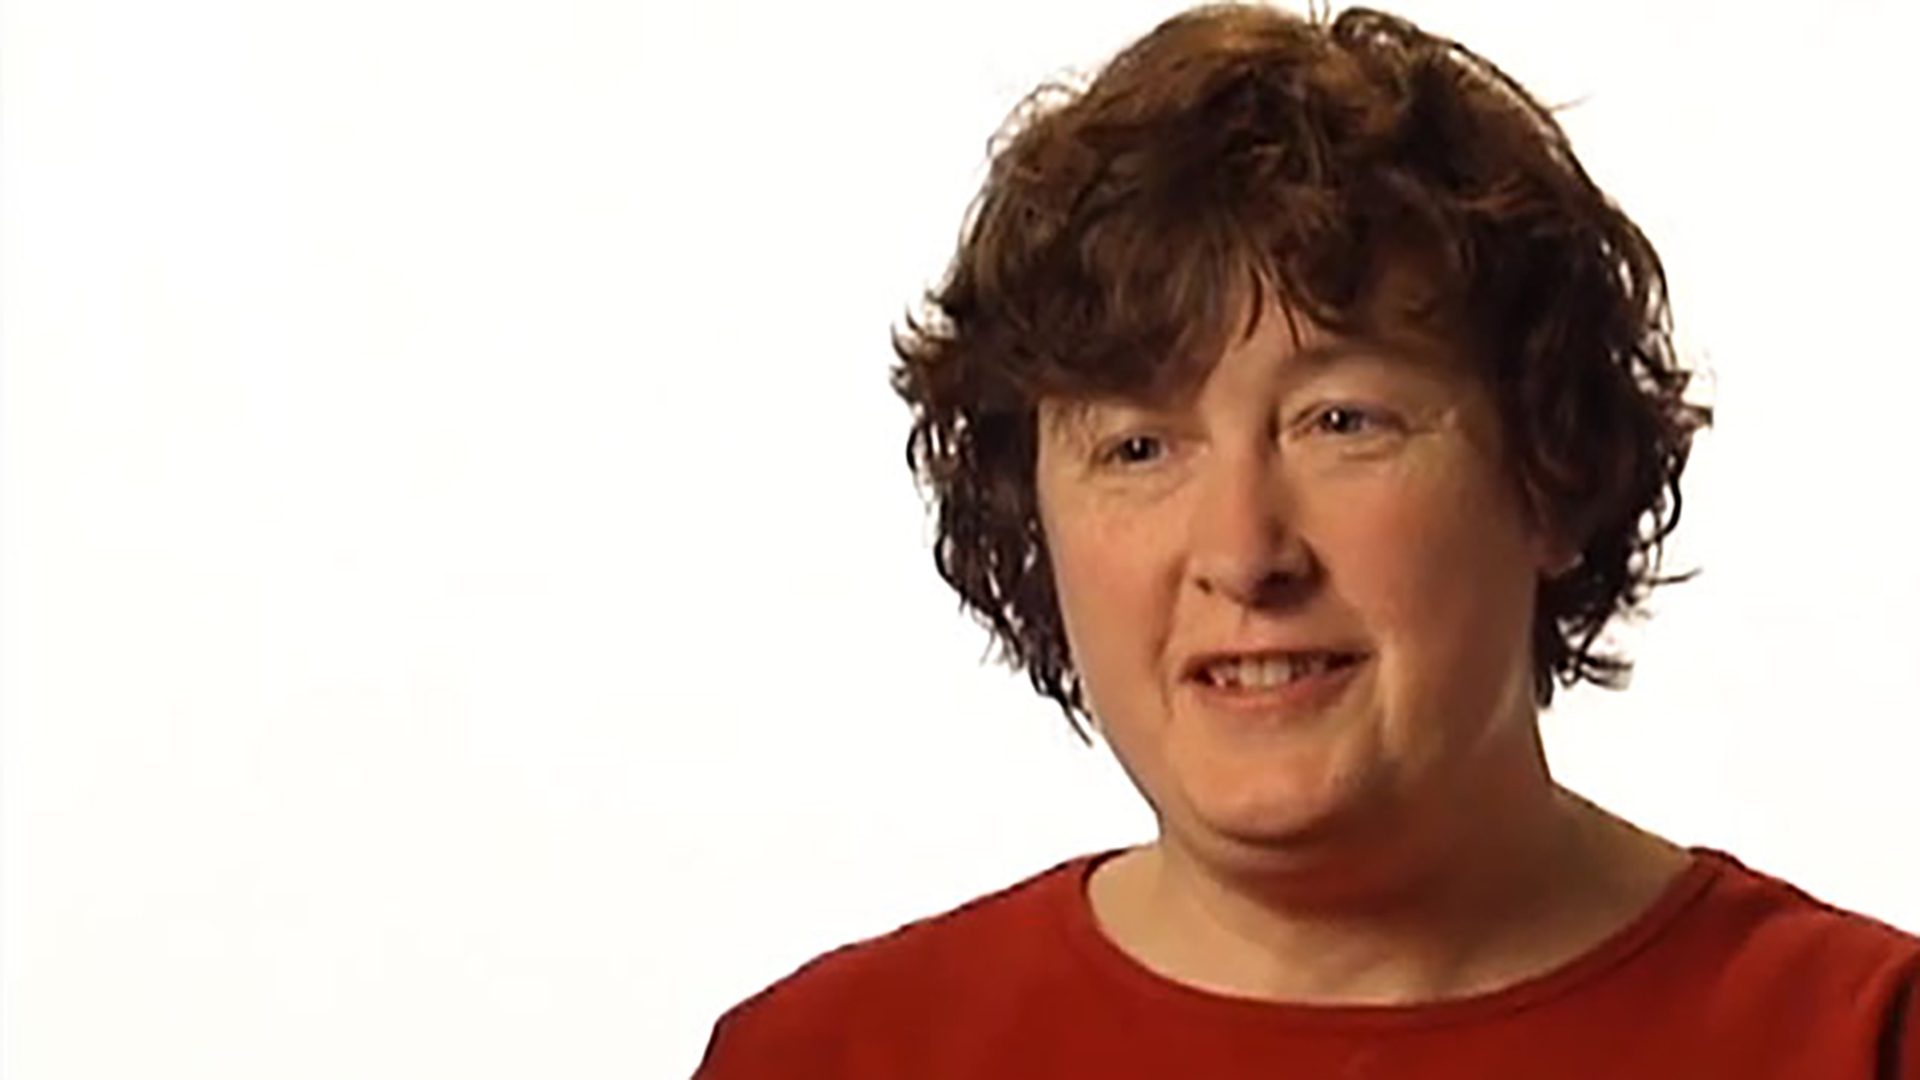 A middle-aged woman with short hair wearing a red shirt is interviewed against a white background.